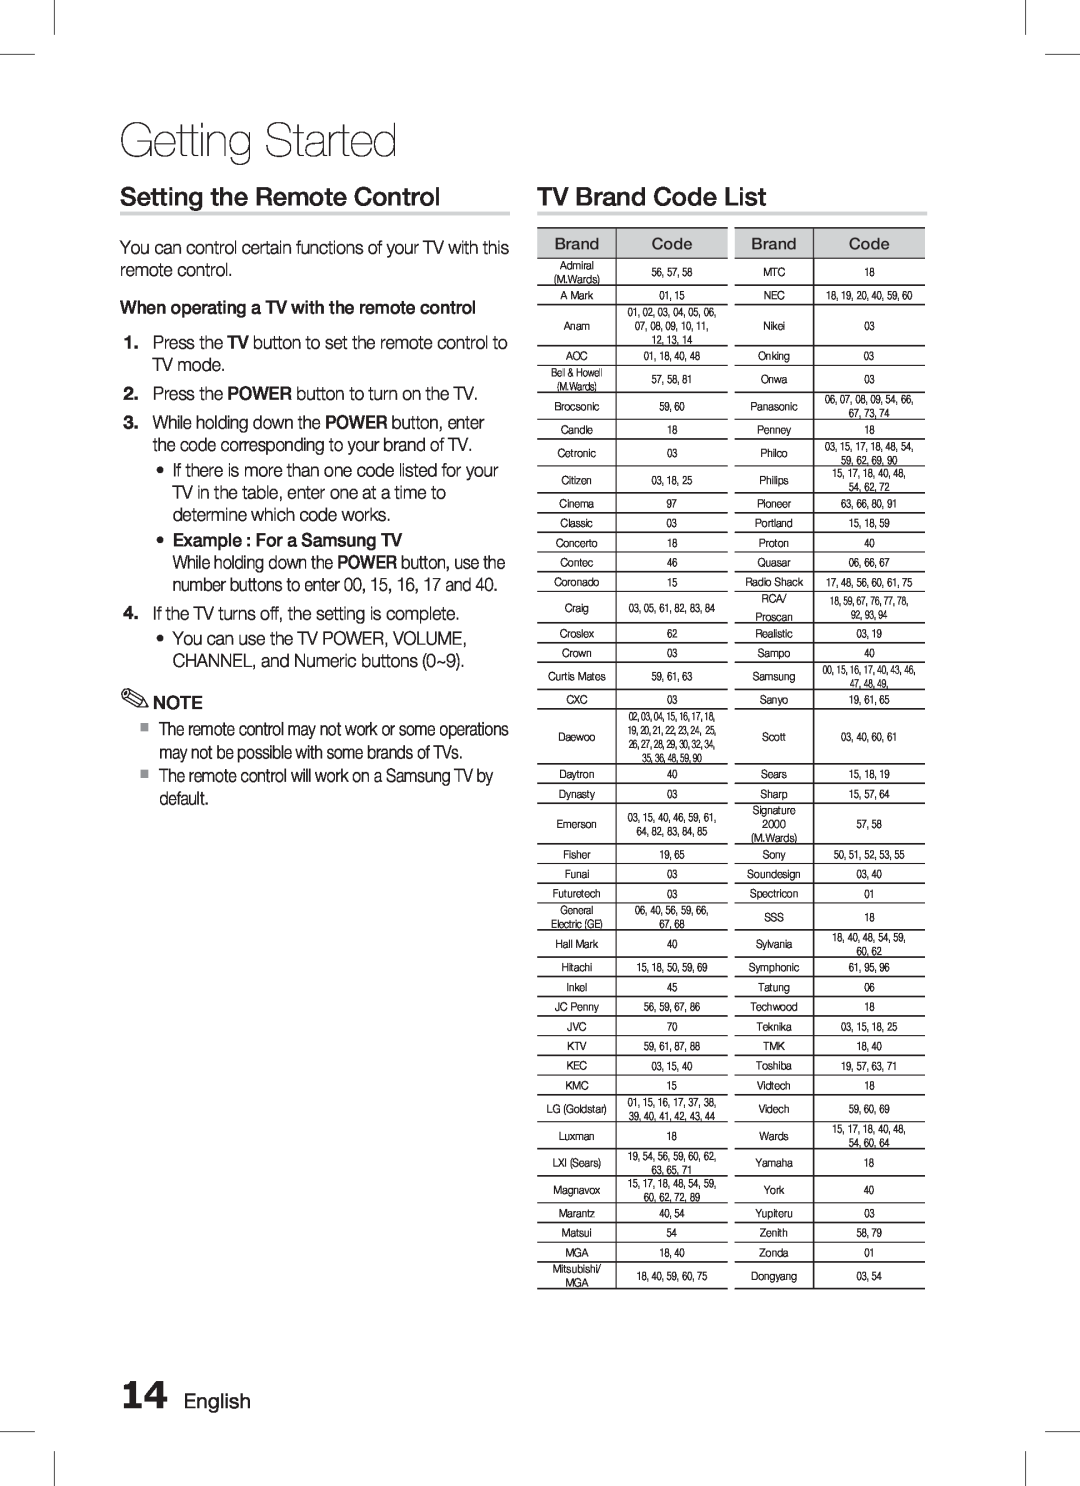 Samsung AH68-02293B, HT-C350 user manual Setting the Remote Control, TV Brand Code List, Getting Started, English 